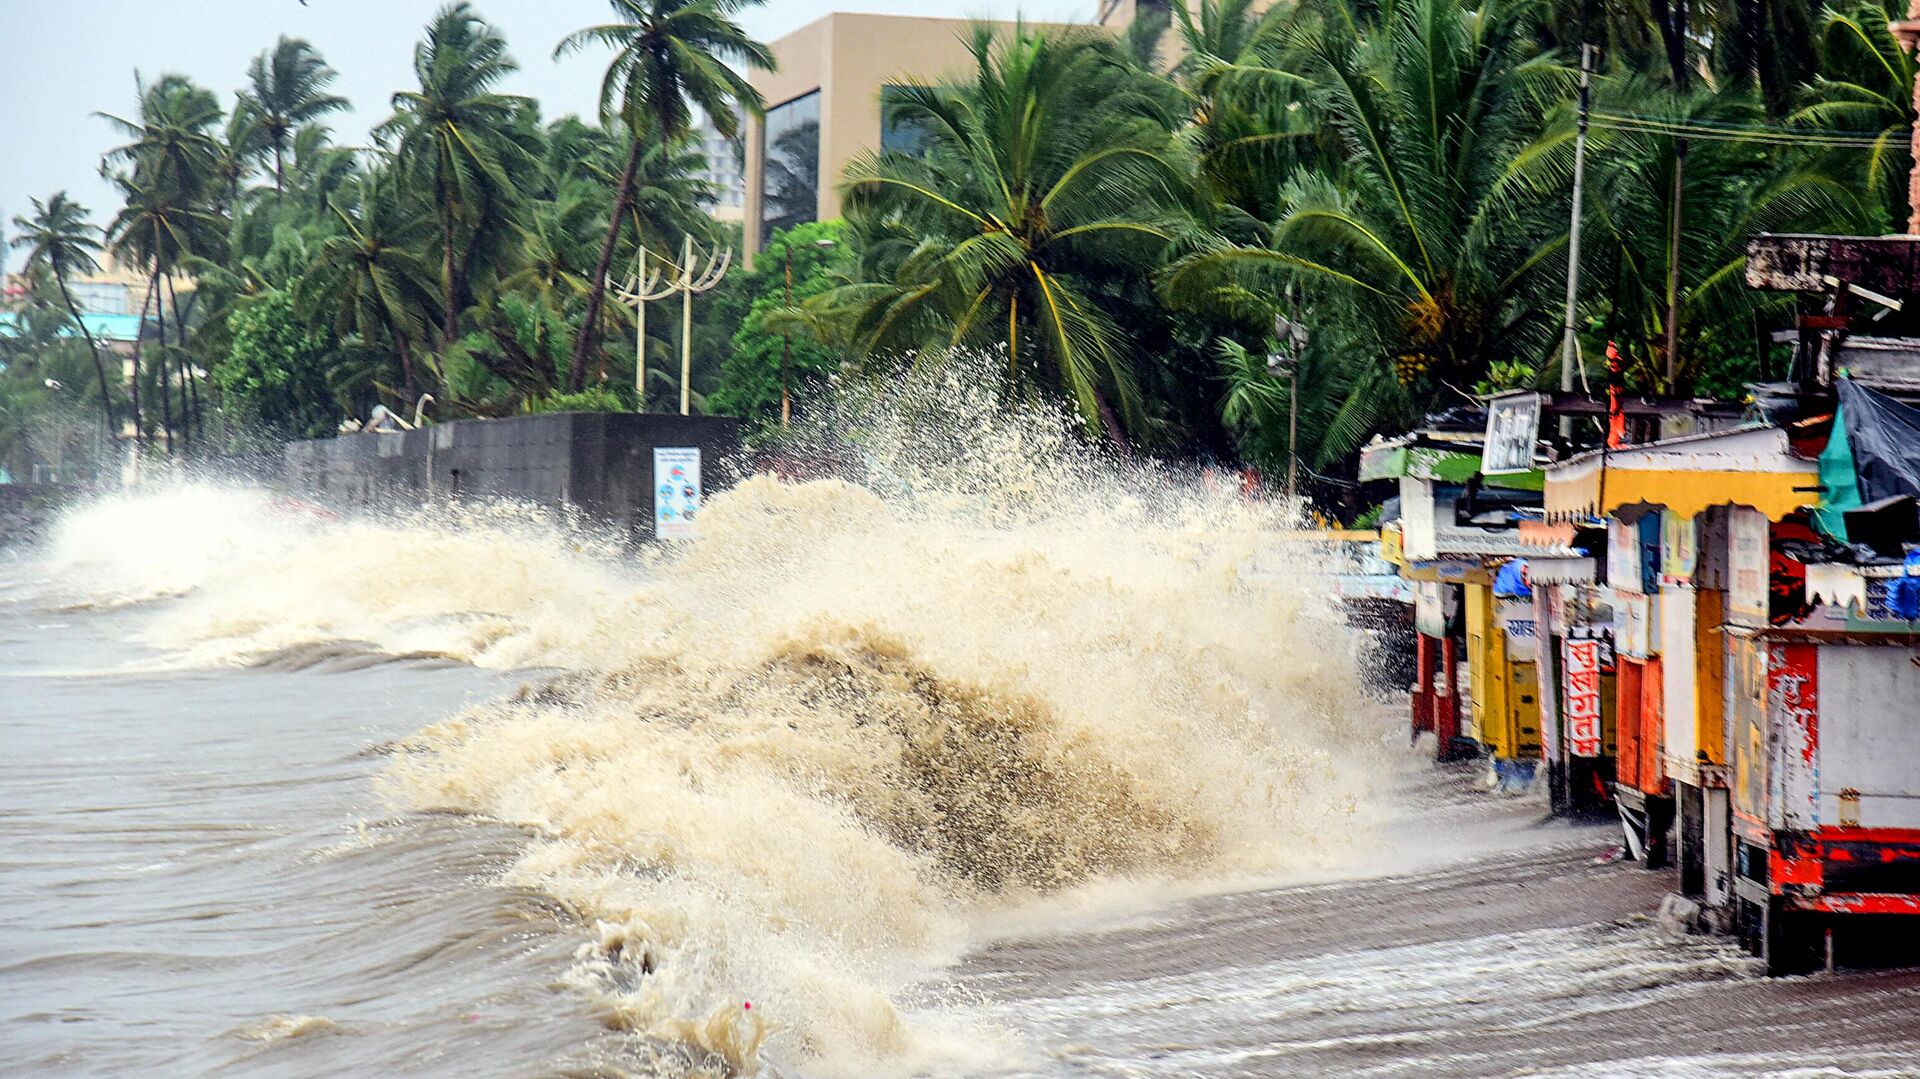 Waves hit shops and structures built along the coast during monsoon in Mumbai on July 5, 2020. (Photo by Sujit Jaiswal / AFP) - Sputnik India, 1920, 01.05.2023